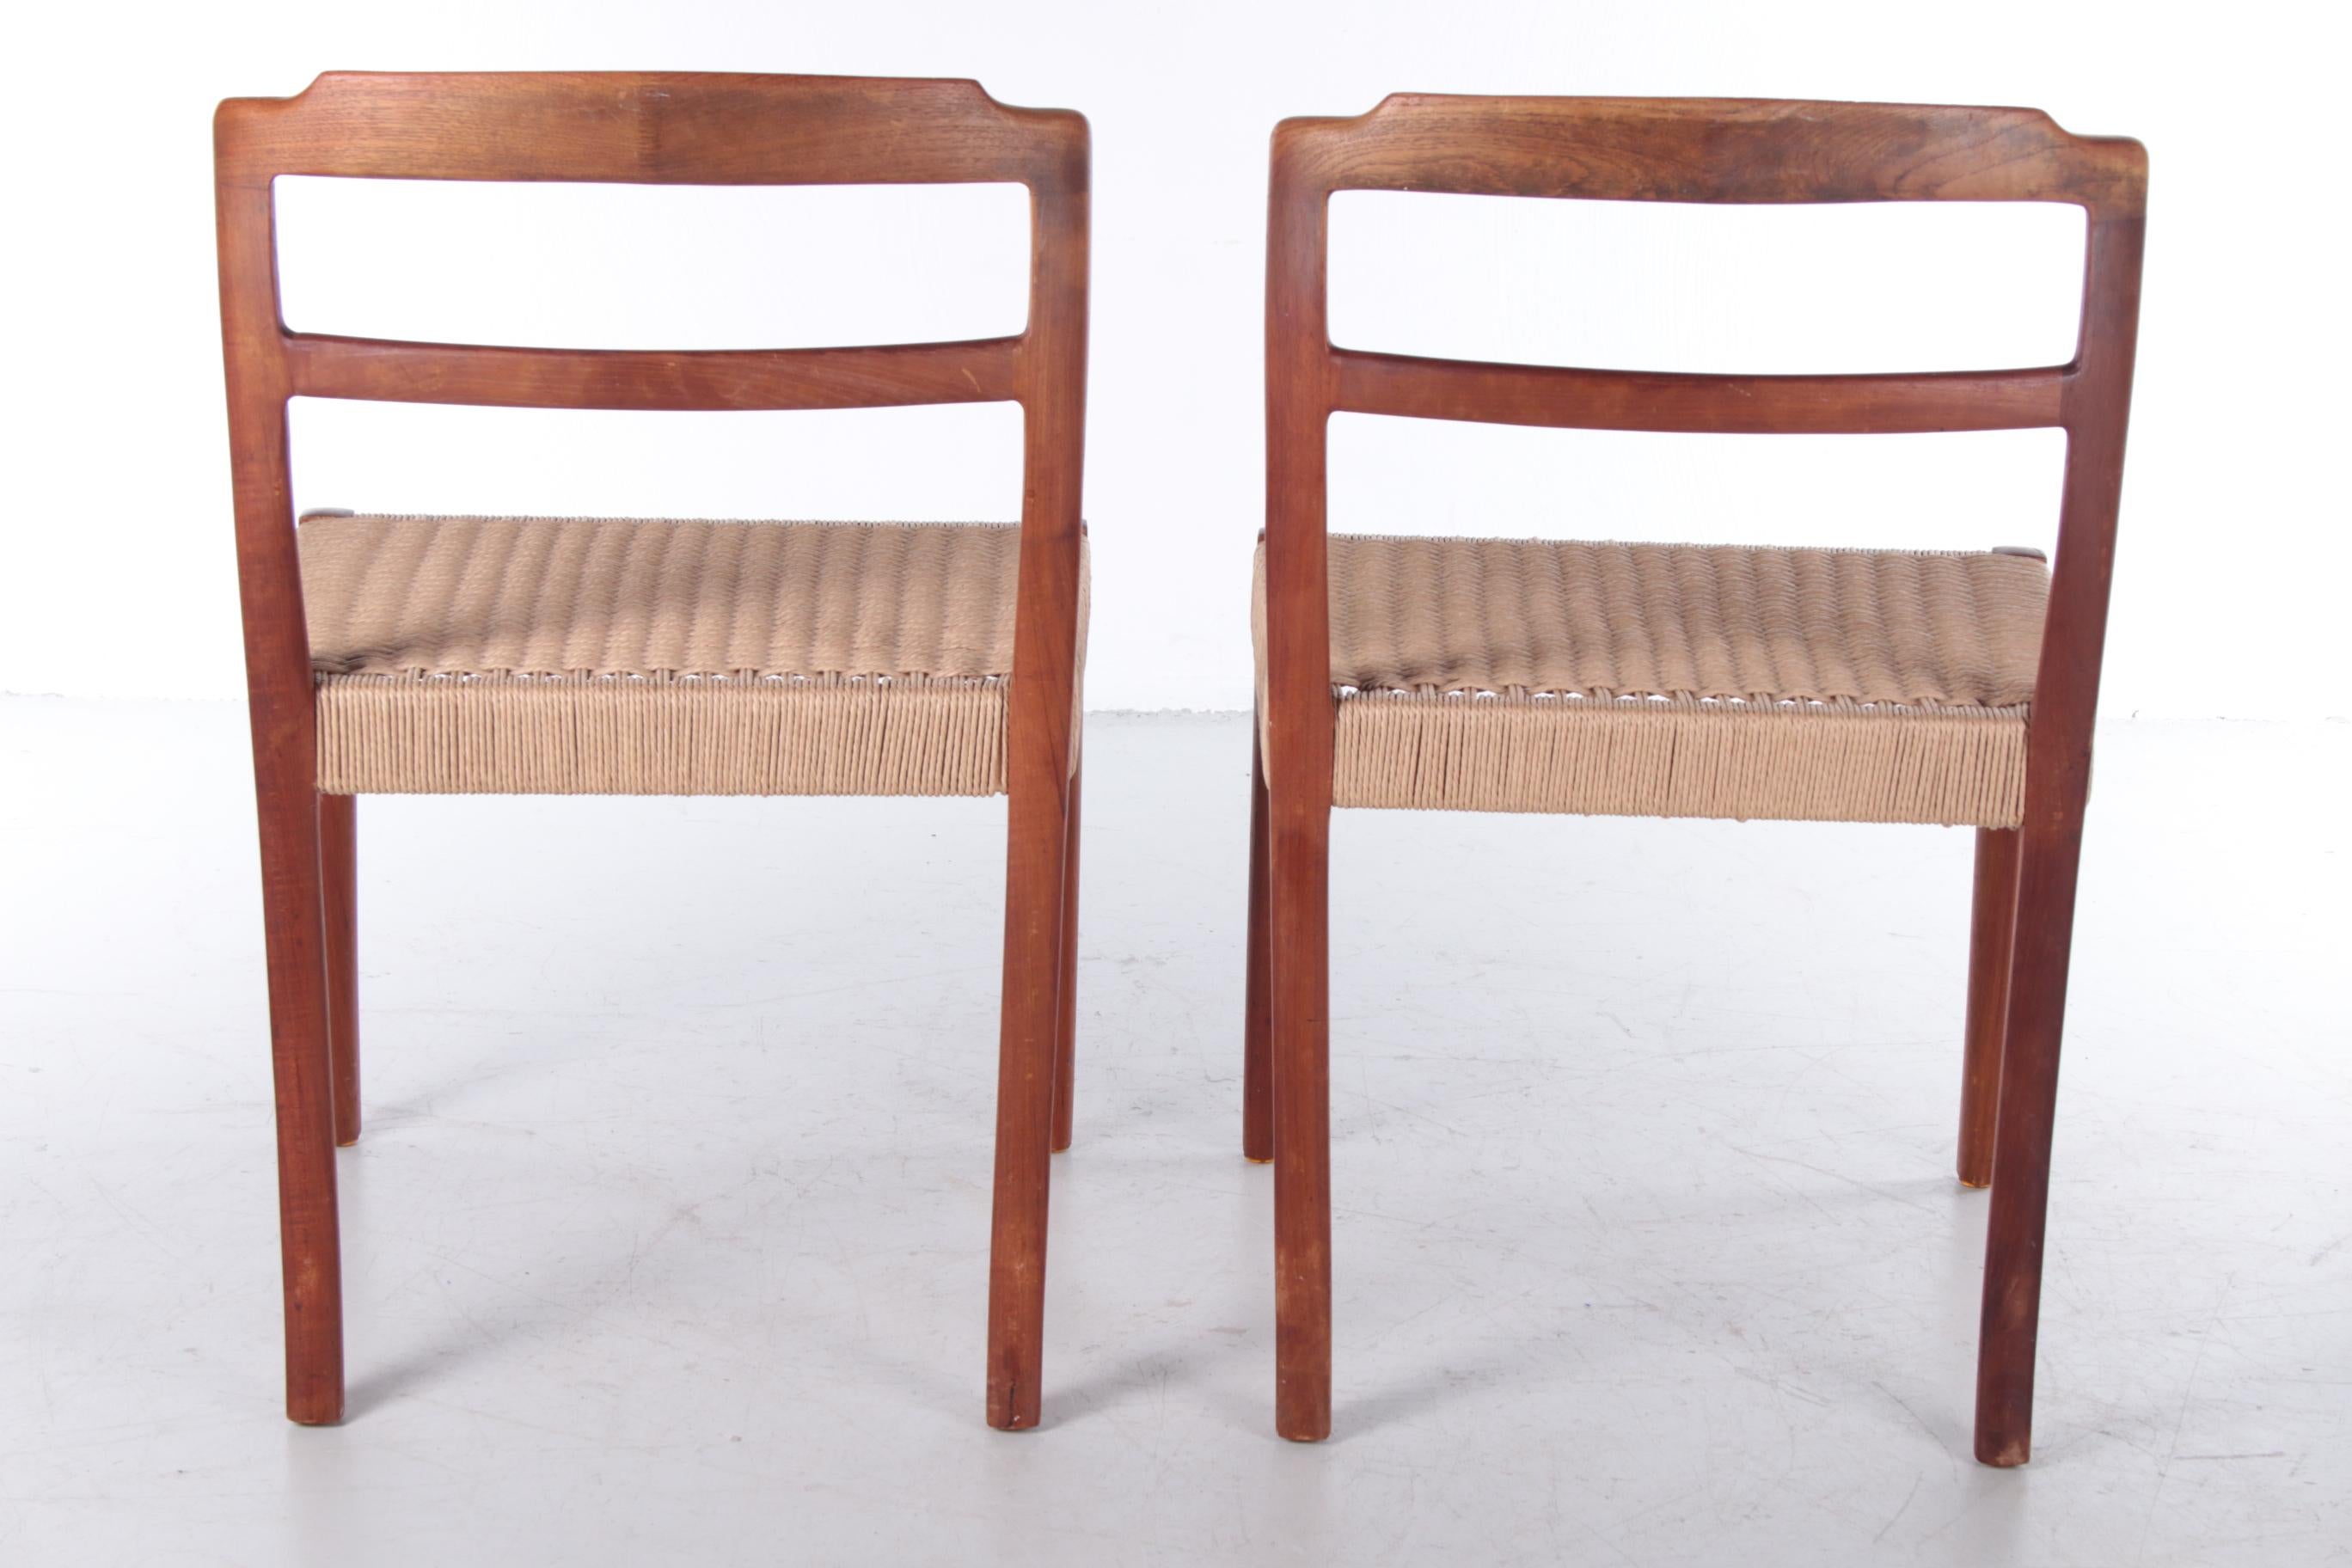 Mid-20th Century Danish Design Set Dining Room Chairs Design by Ole Wanscher, 1960